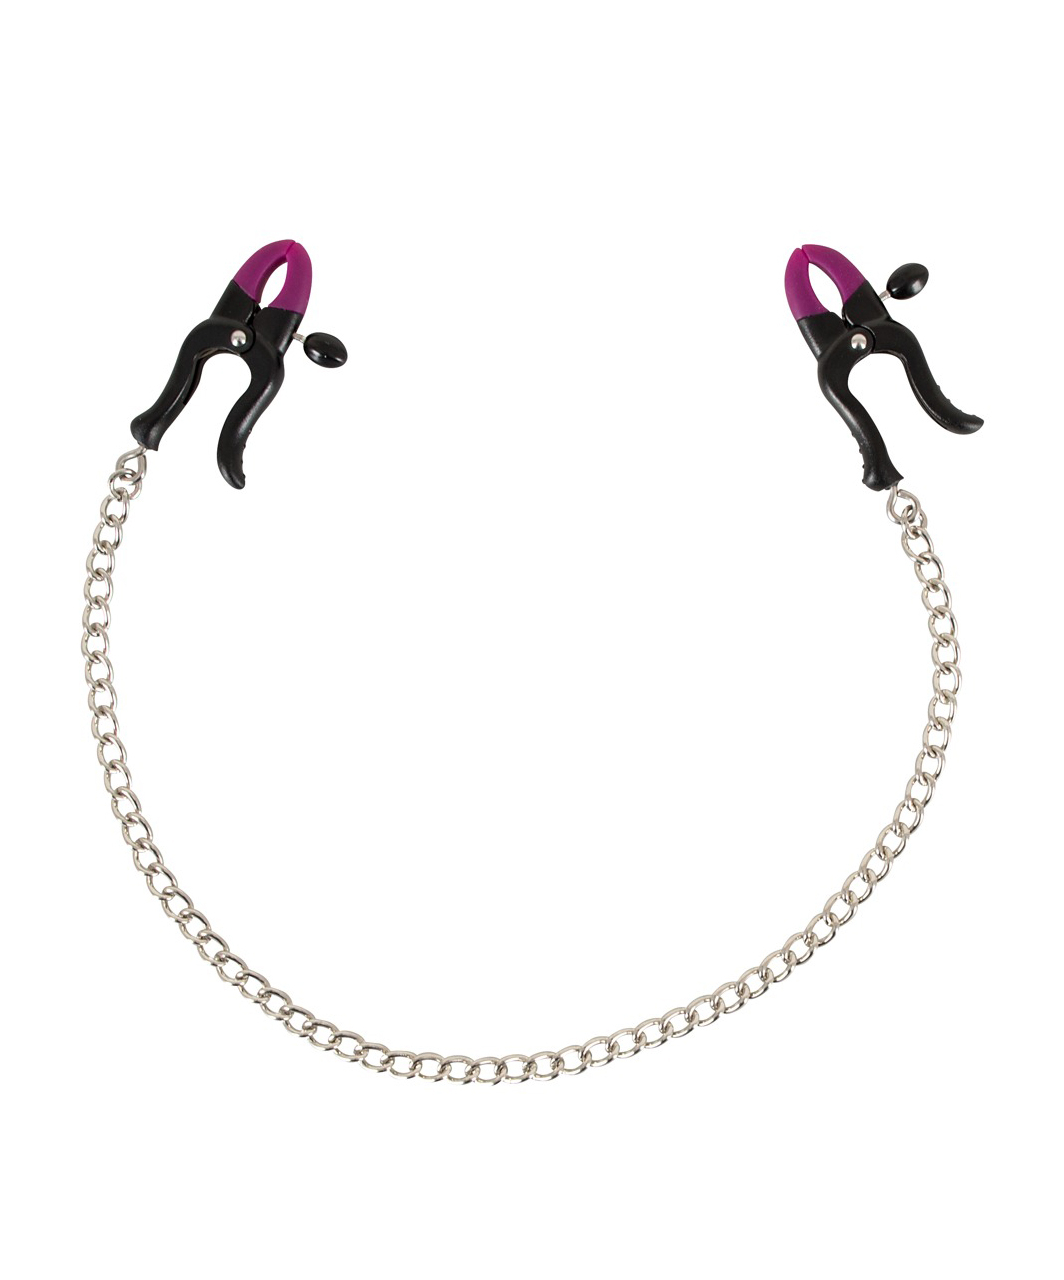 Bad Kitty nipple clamps with chain